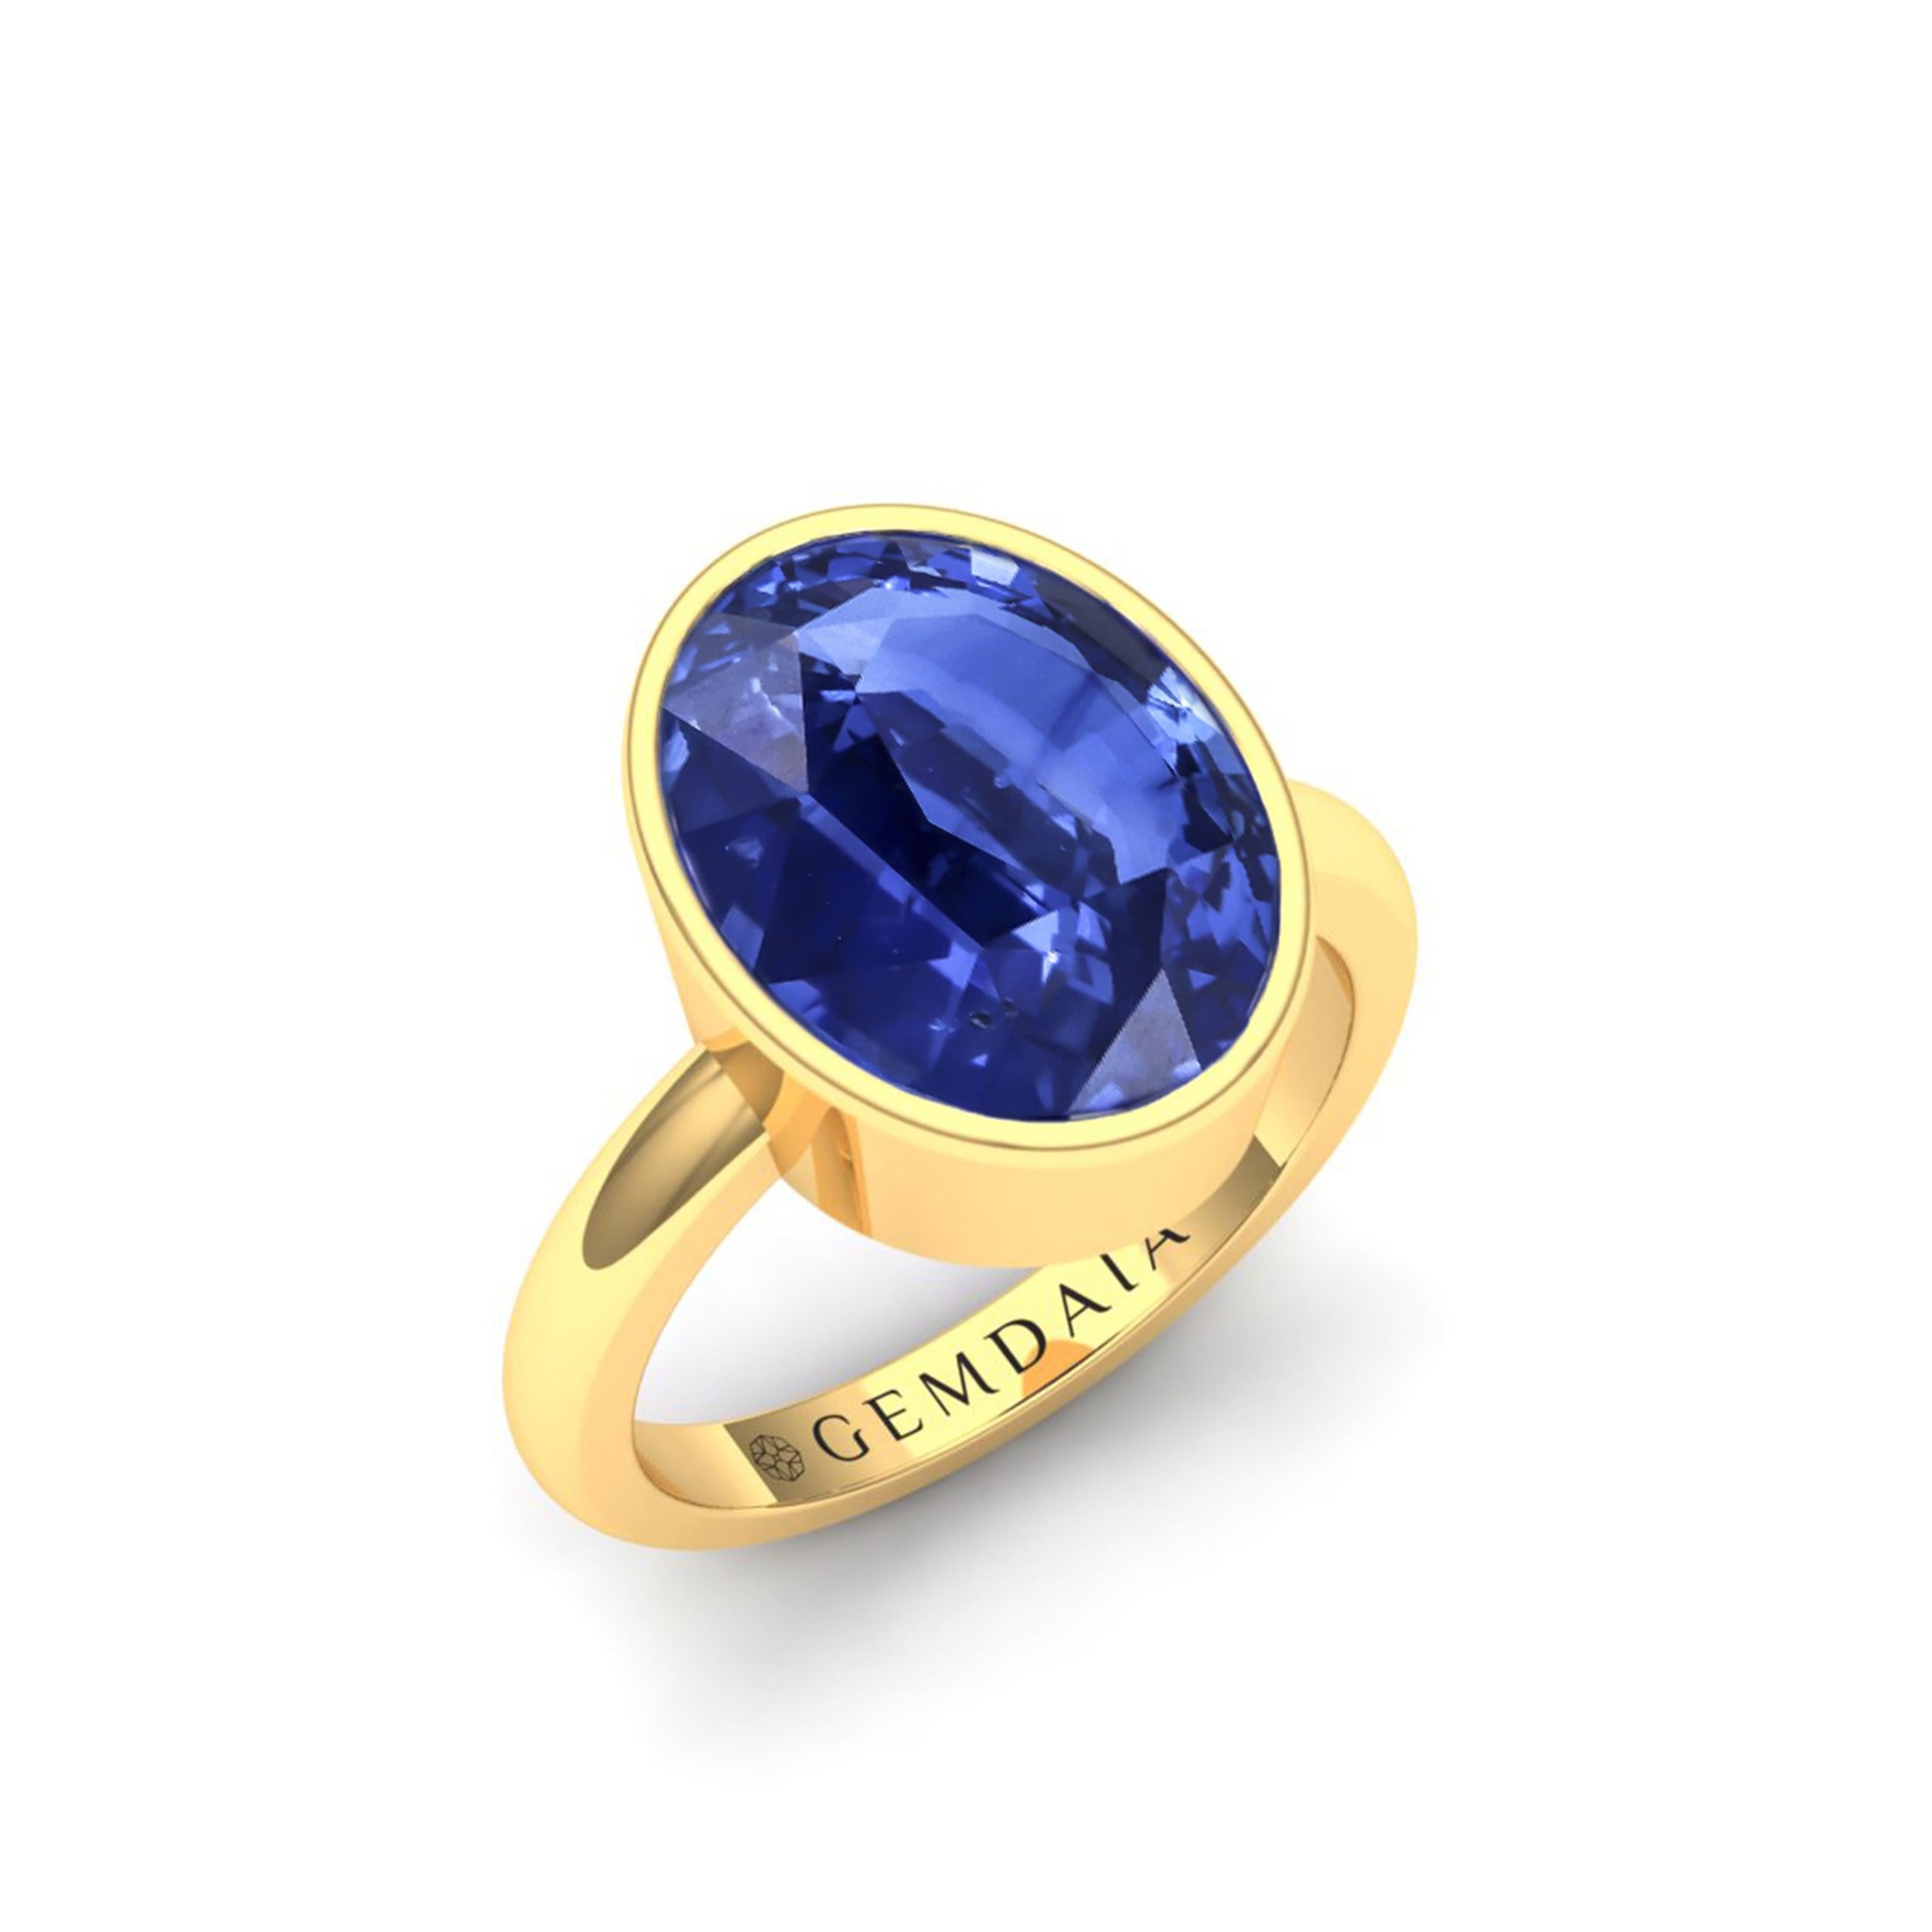 Make a bold statement with our custom-made ring featuring a 7.5-carat natural untreated Ceylon Blue Sapphire in a mesmerizing Cornflower Blue hue. Certified by the Antwerp Laboratory for Gemstone Testing, this ring is a symbol of sophistication.